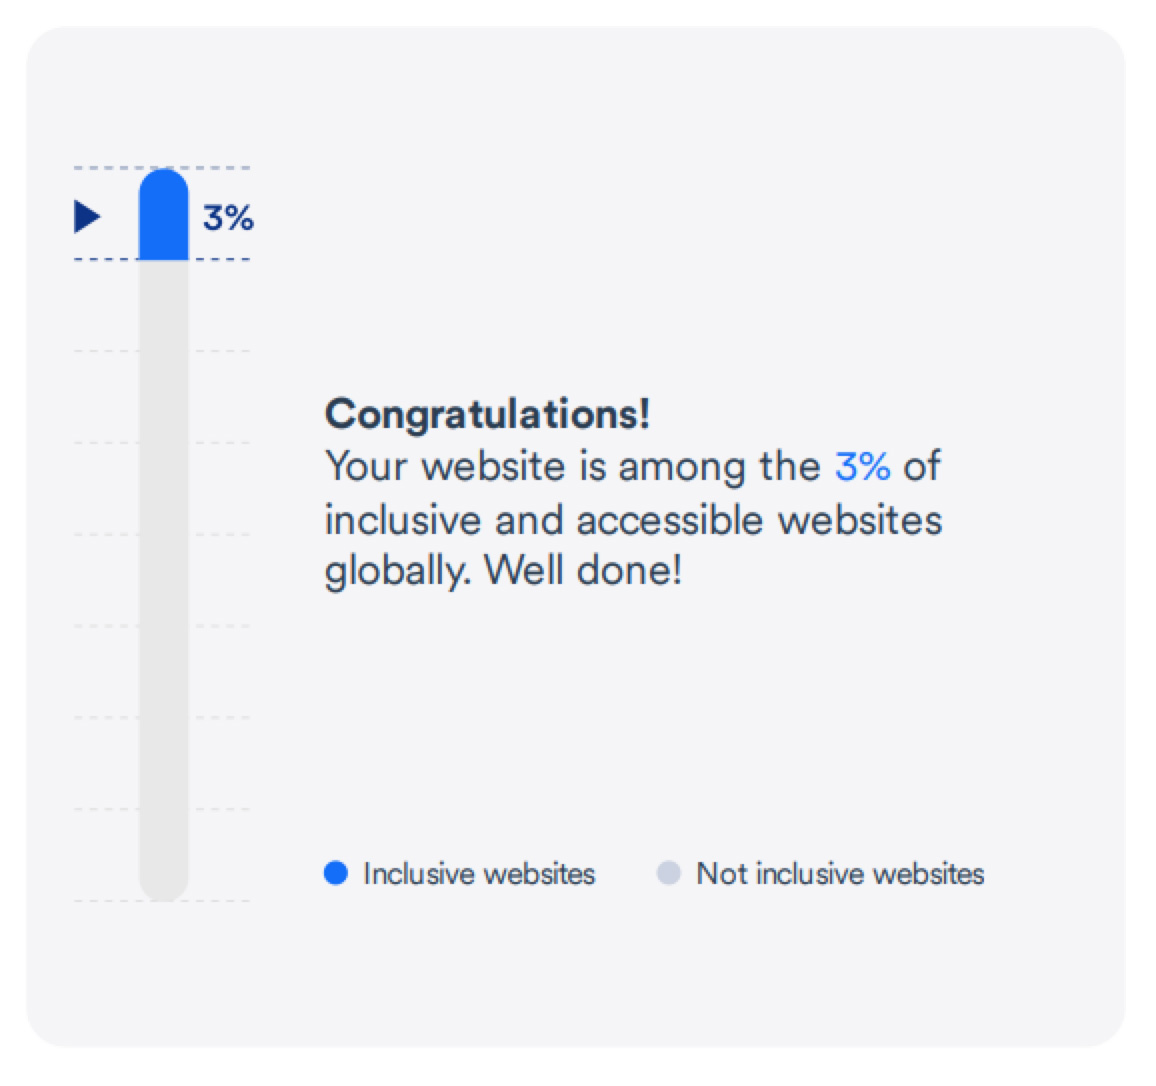 You are one of the top 3% of accessible websites